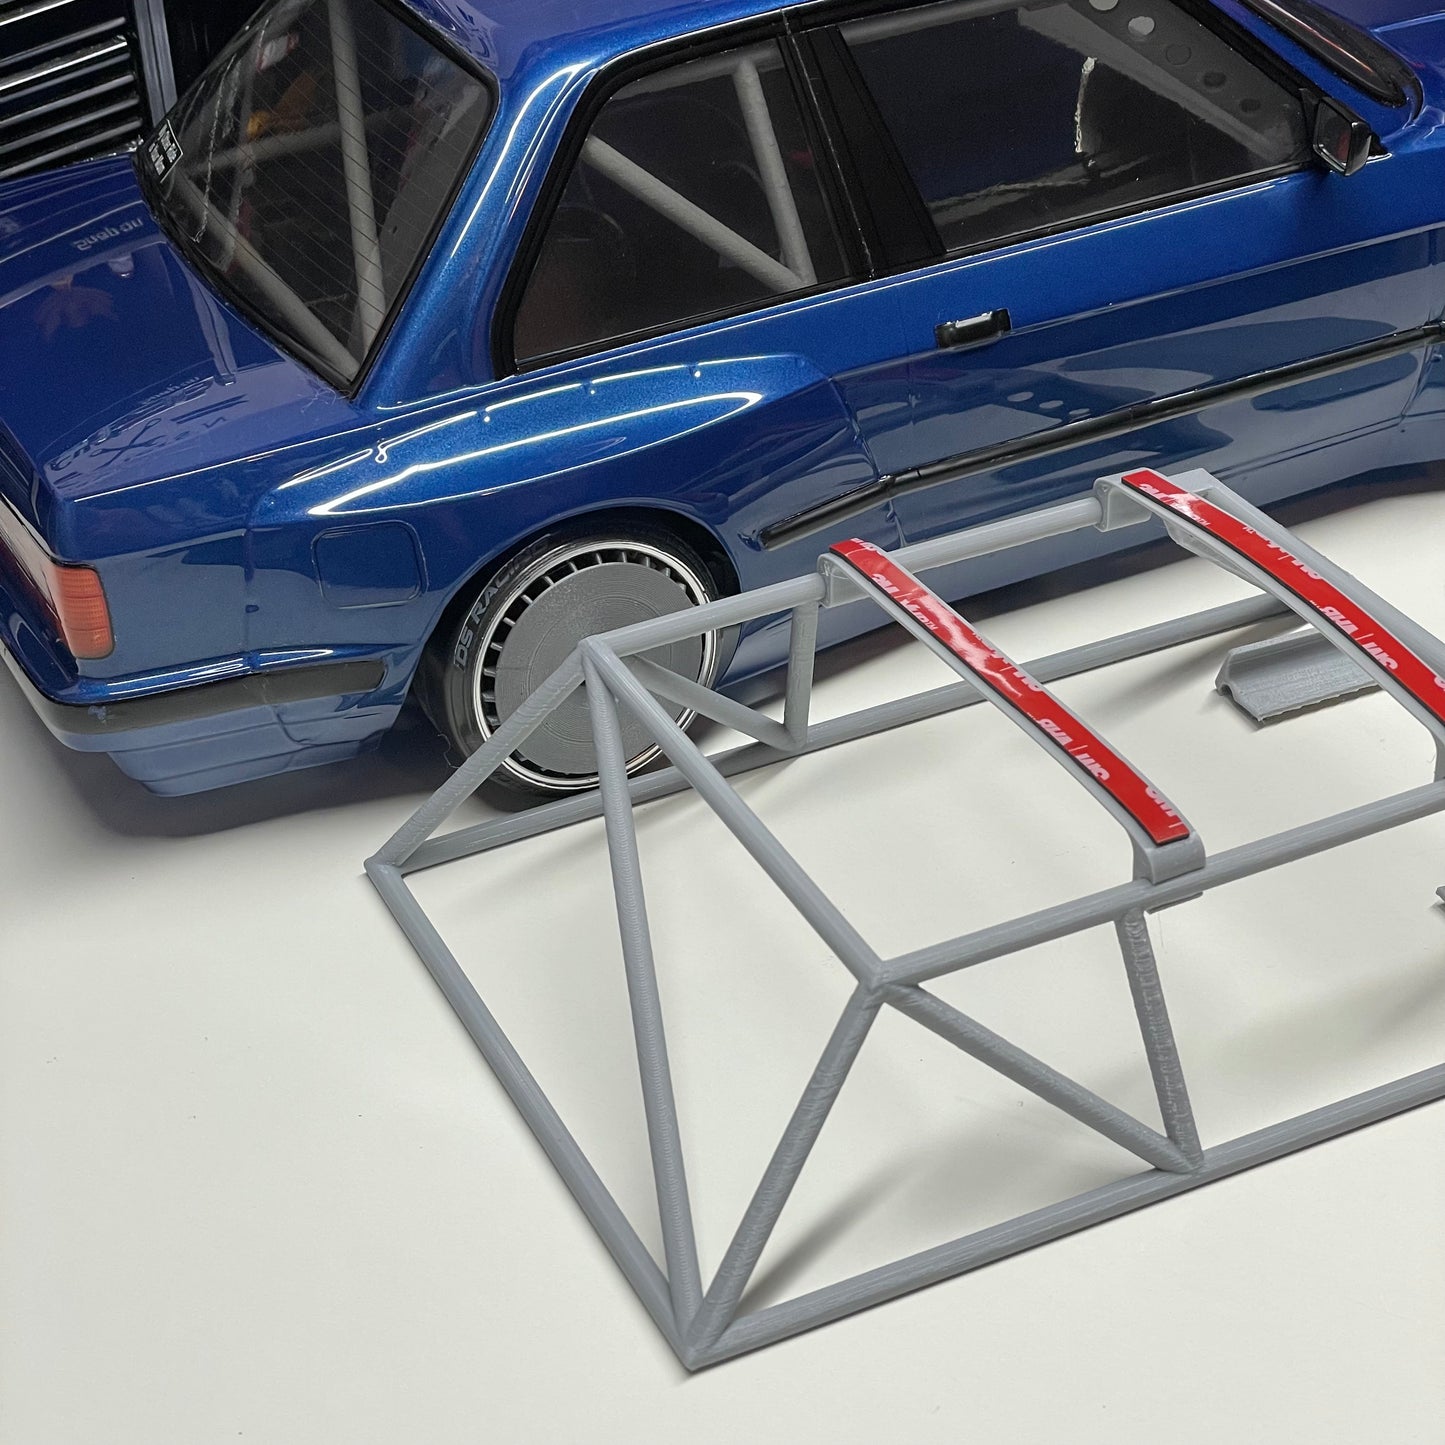 1/10 Scale One Piece Roll Cage for the MST RMX Drift E30 BMW Body